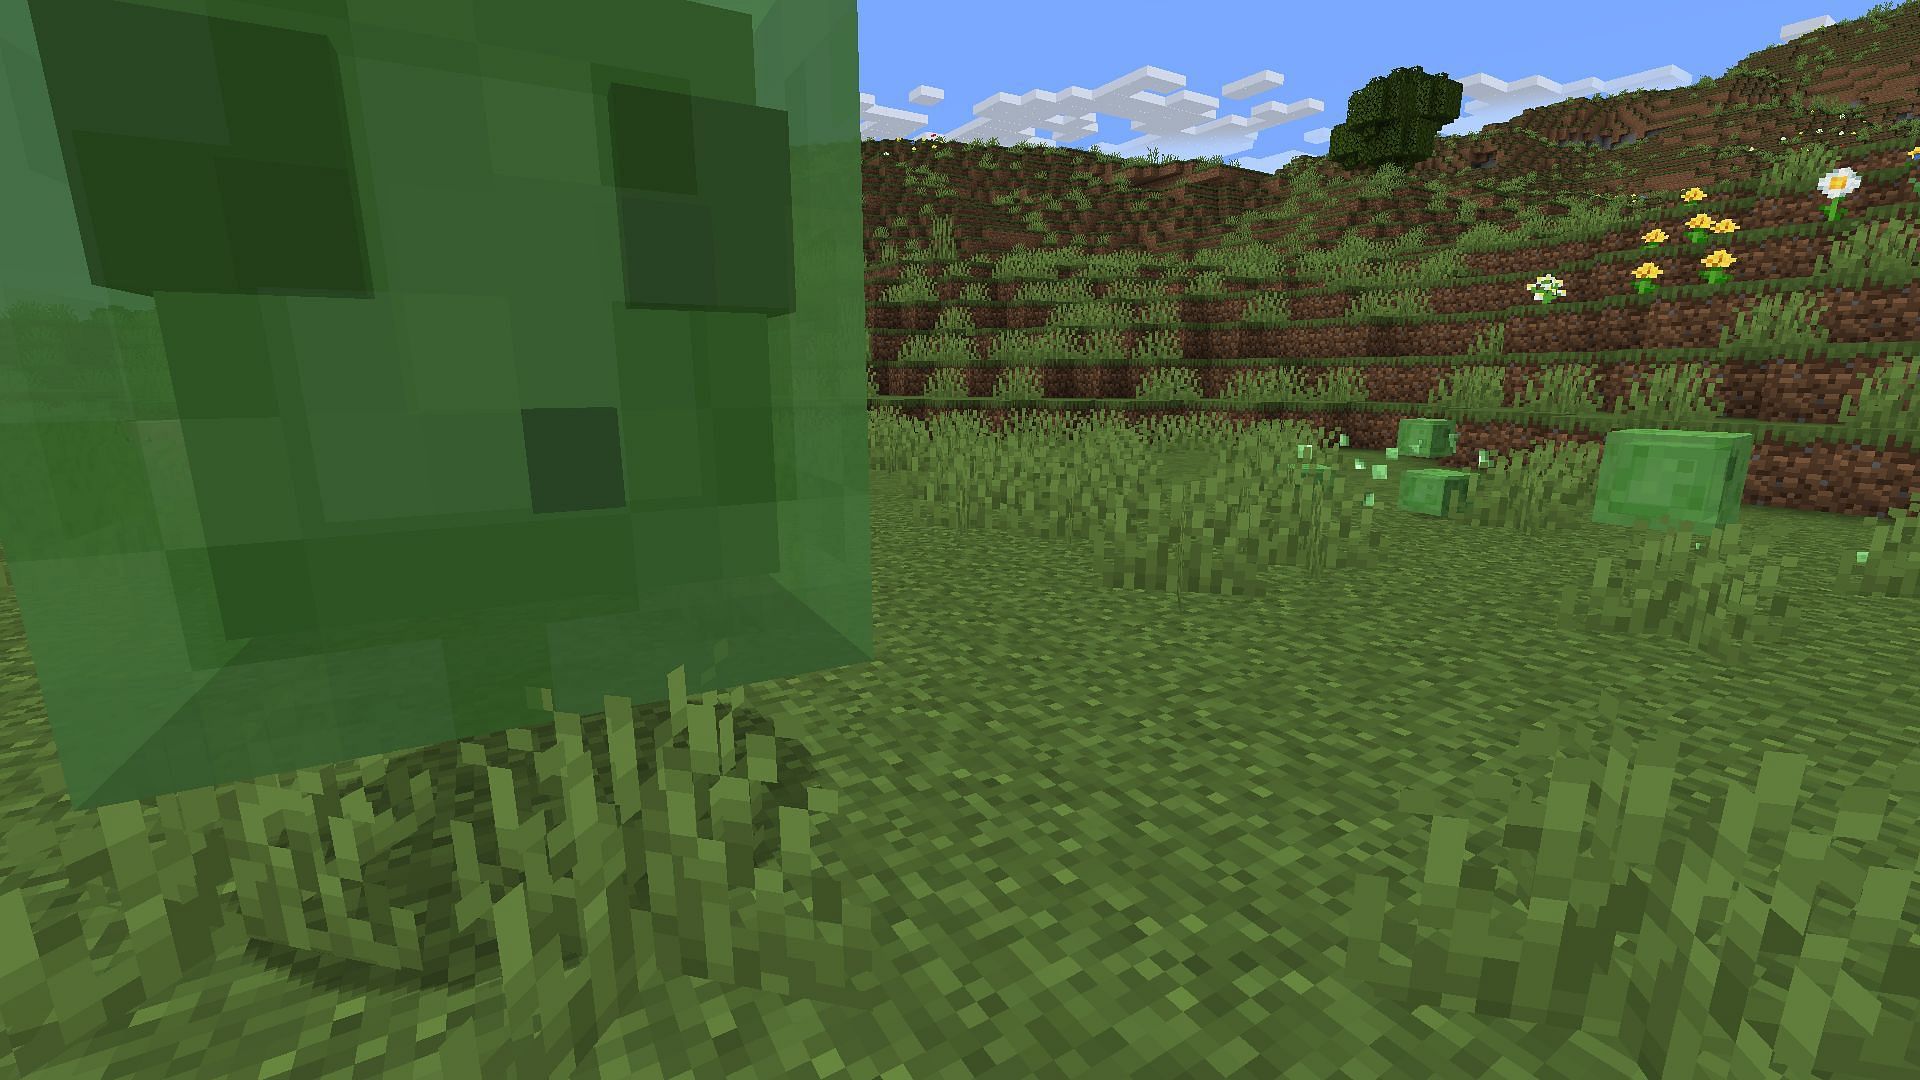 Slimes in a field (Image via Minecraft)